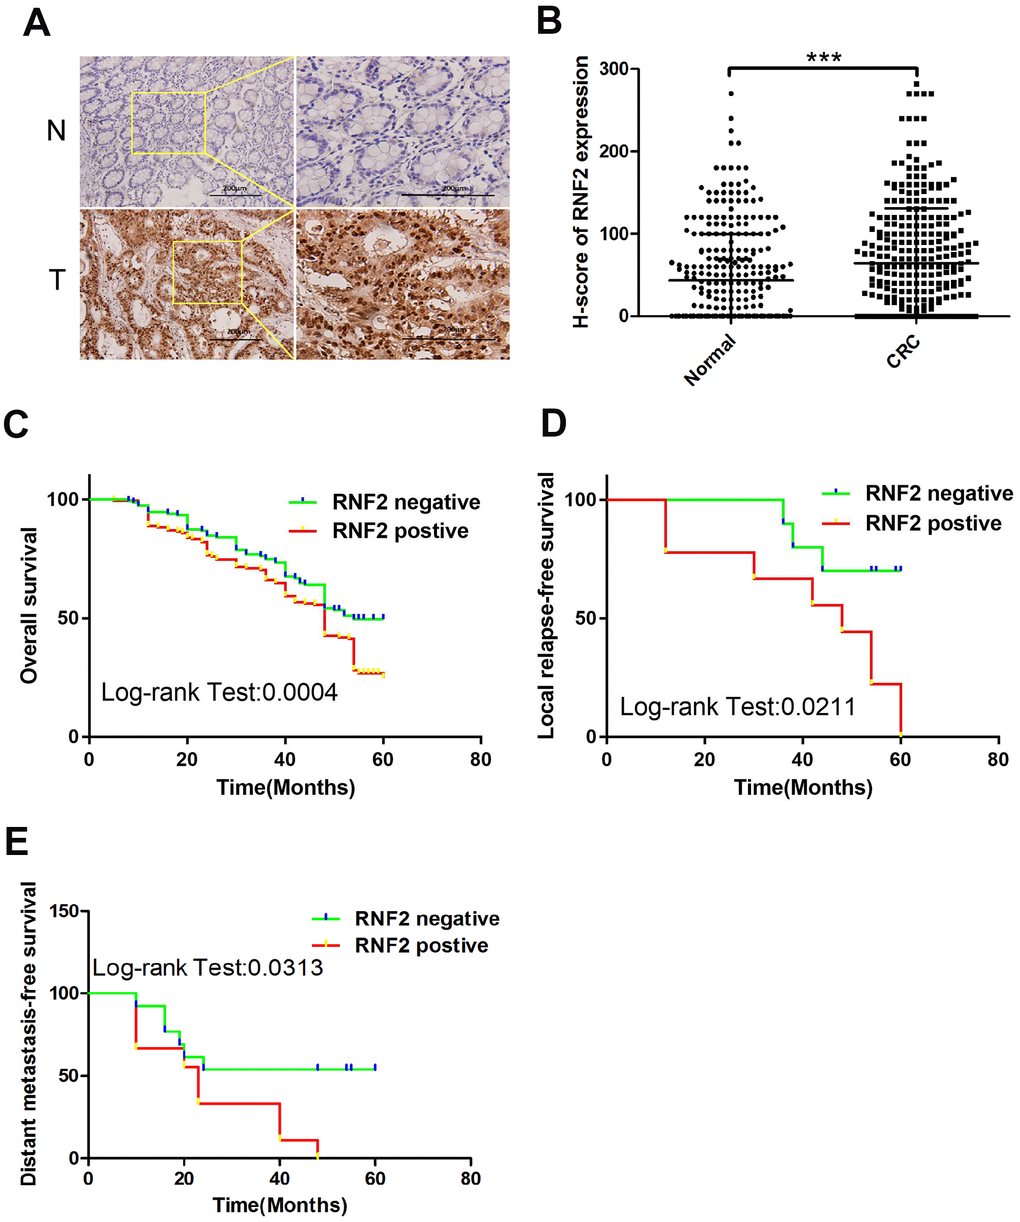 RNF2 expression was upregulated in CRC tumor tissues and was associated with patients’ prognoses. (A) Representative immunohistochemistry results depicting positive and negative RNF2 staining in clinical CRC tumor tissues and adjacent normal tissues. The pictures on the right are the magnified view of the yellow boxes on the left. Scale bar: 200 μm. (B) H-scores for RNF2 expression in 313 CRC tumor tissues and adjacent normal tissues. ***pC) Overall survival of RNF2-positive or -negative CRC patients. (D) Local relapse-free survival of RNF2-positive or -negative CRC patients. (E) Distant metastasis-free survival of RNF2-positive or -negative CRC patients.